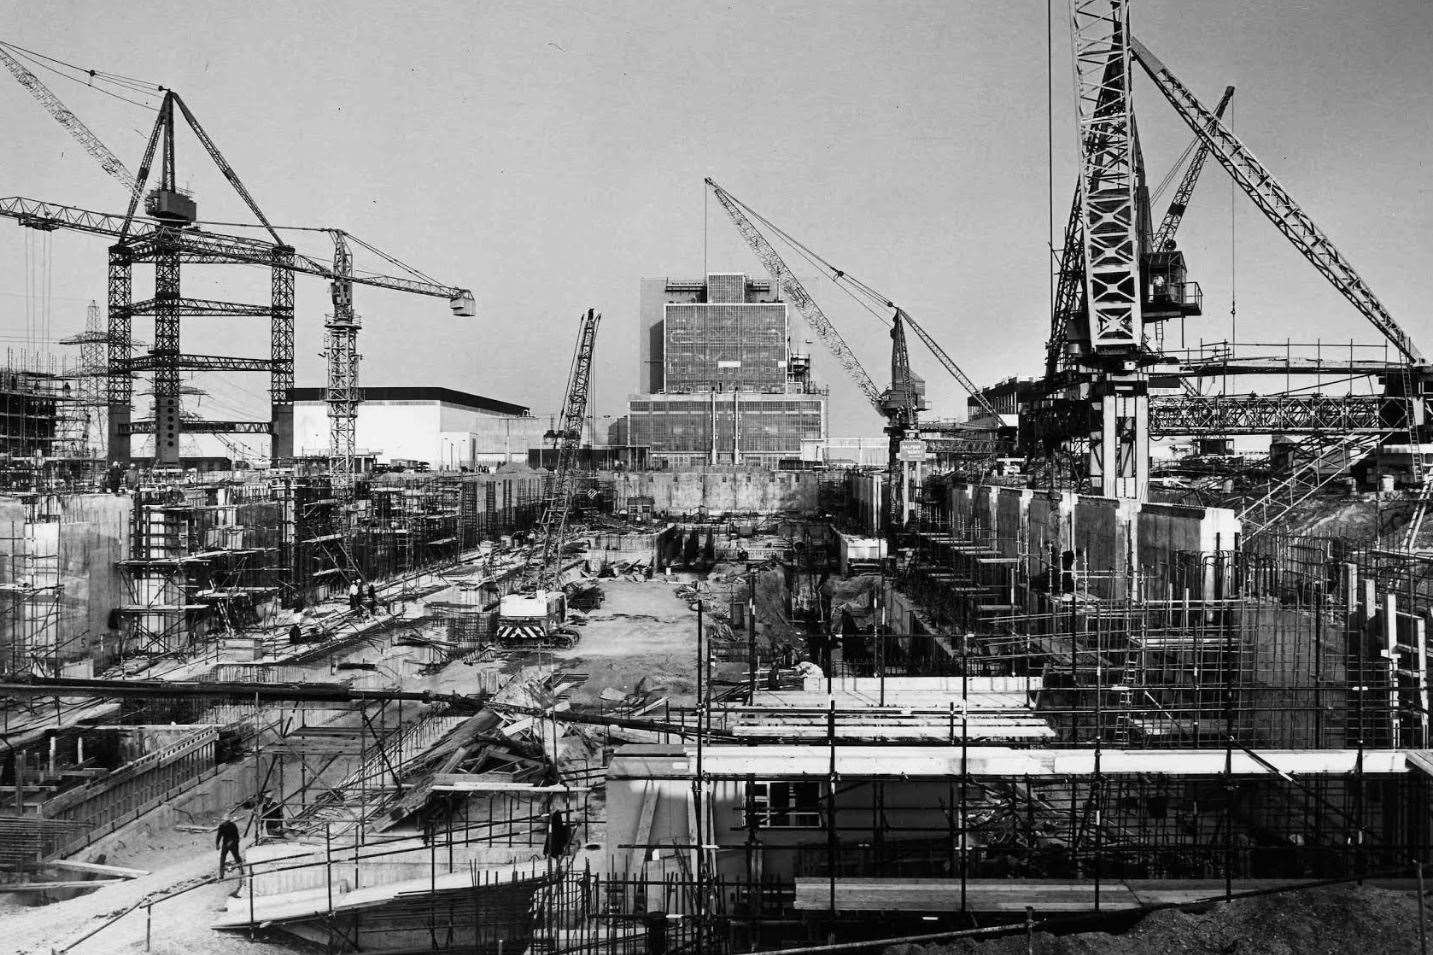 Dungeness B during construction in 1966